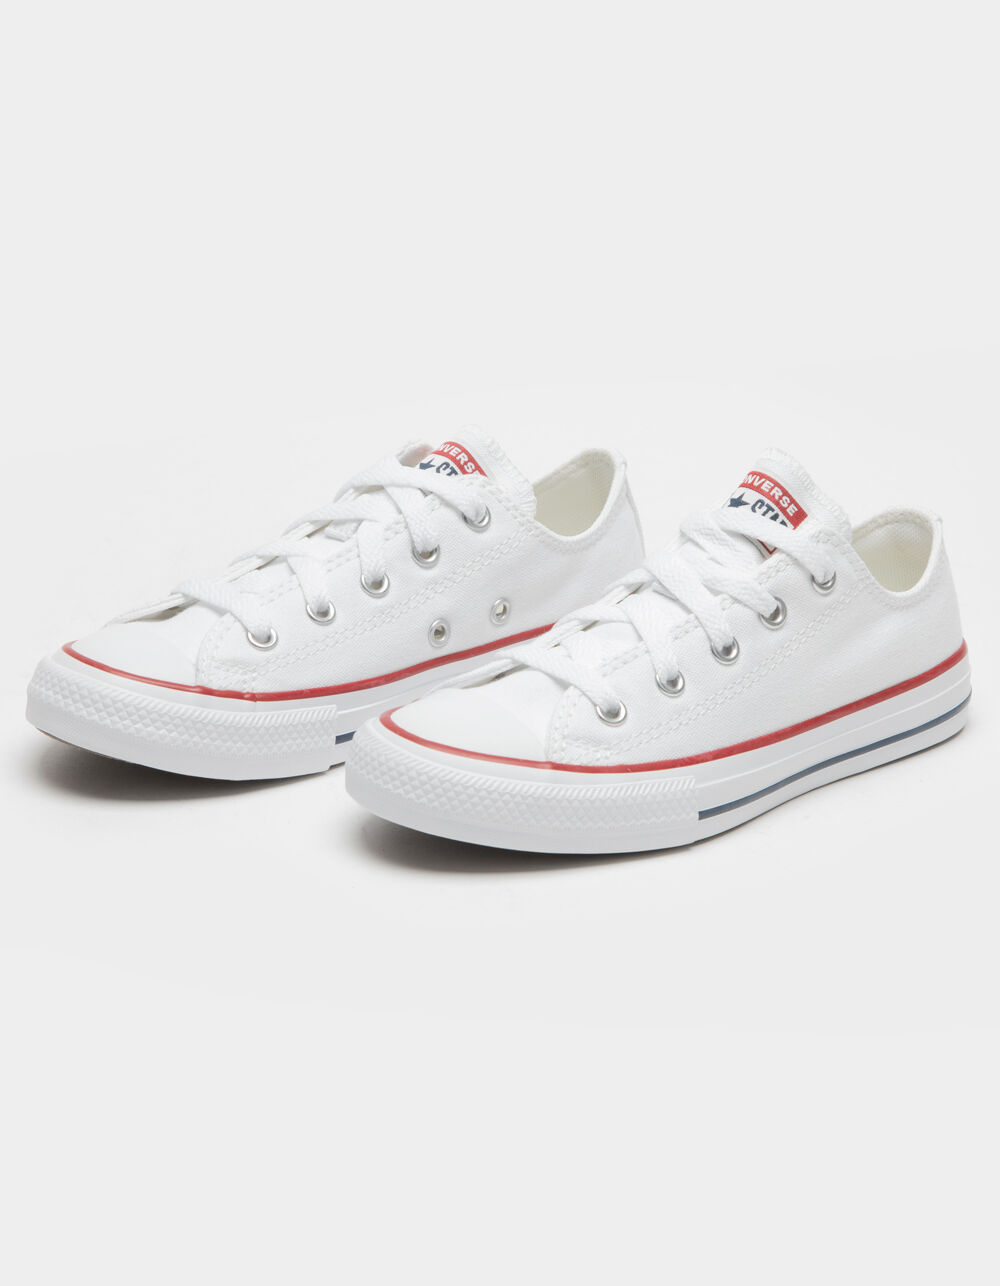 about Trojan horse Borrowed CONVERSE Chuck Taylor All Star Kids Low Top Shoes - WHITE | Tillys